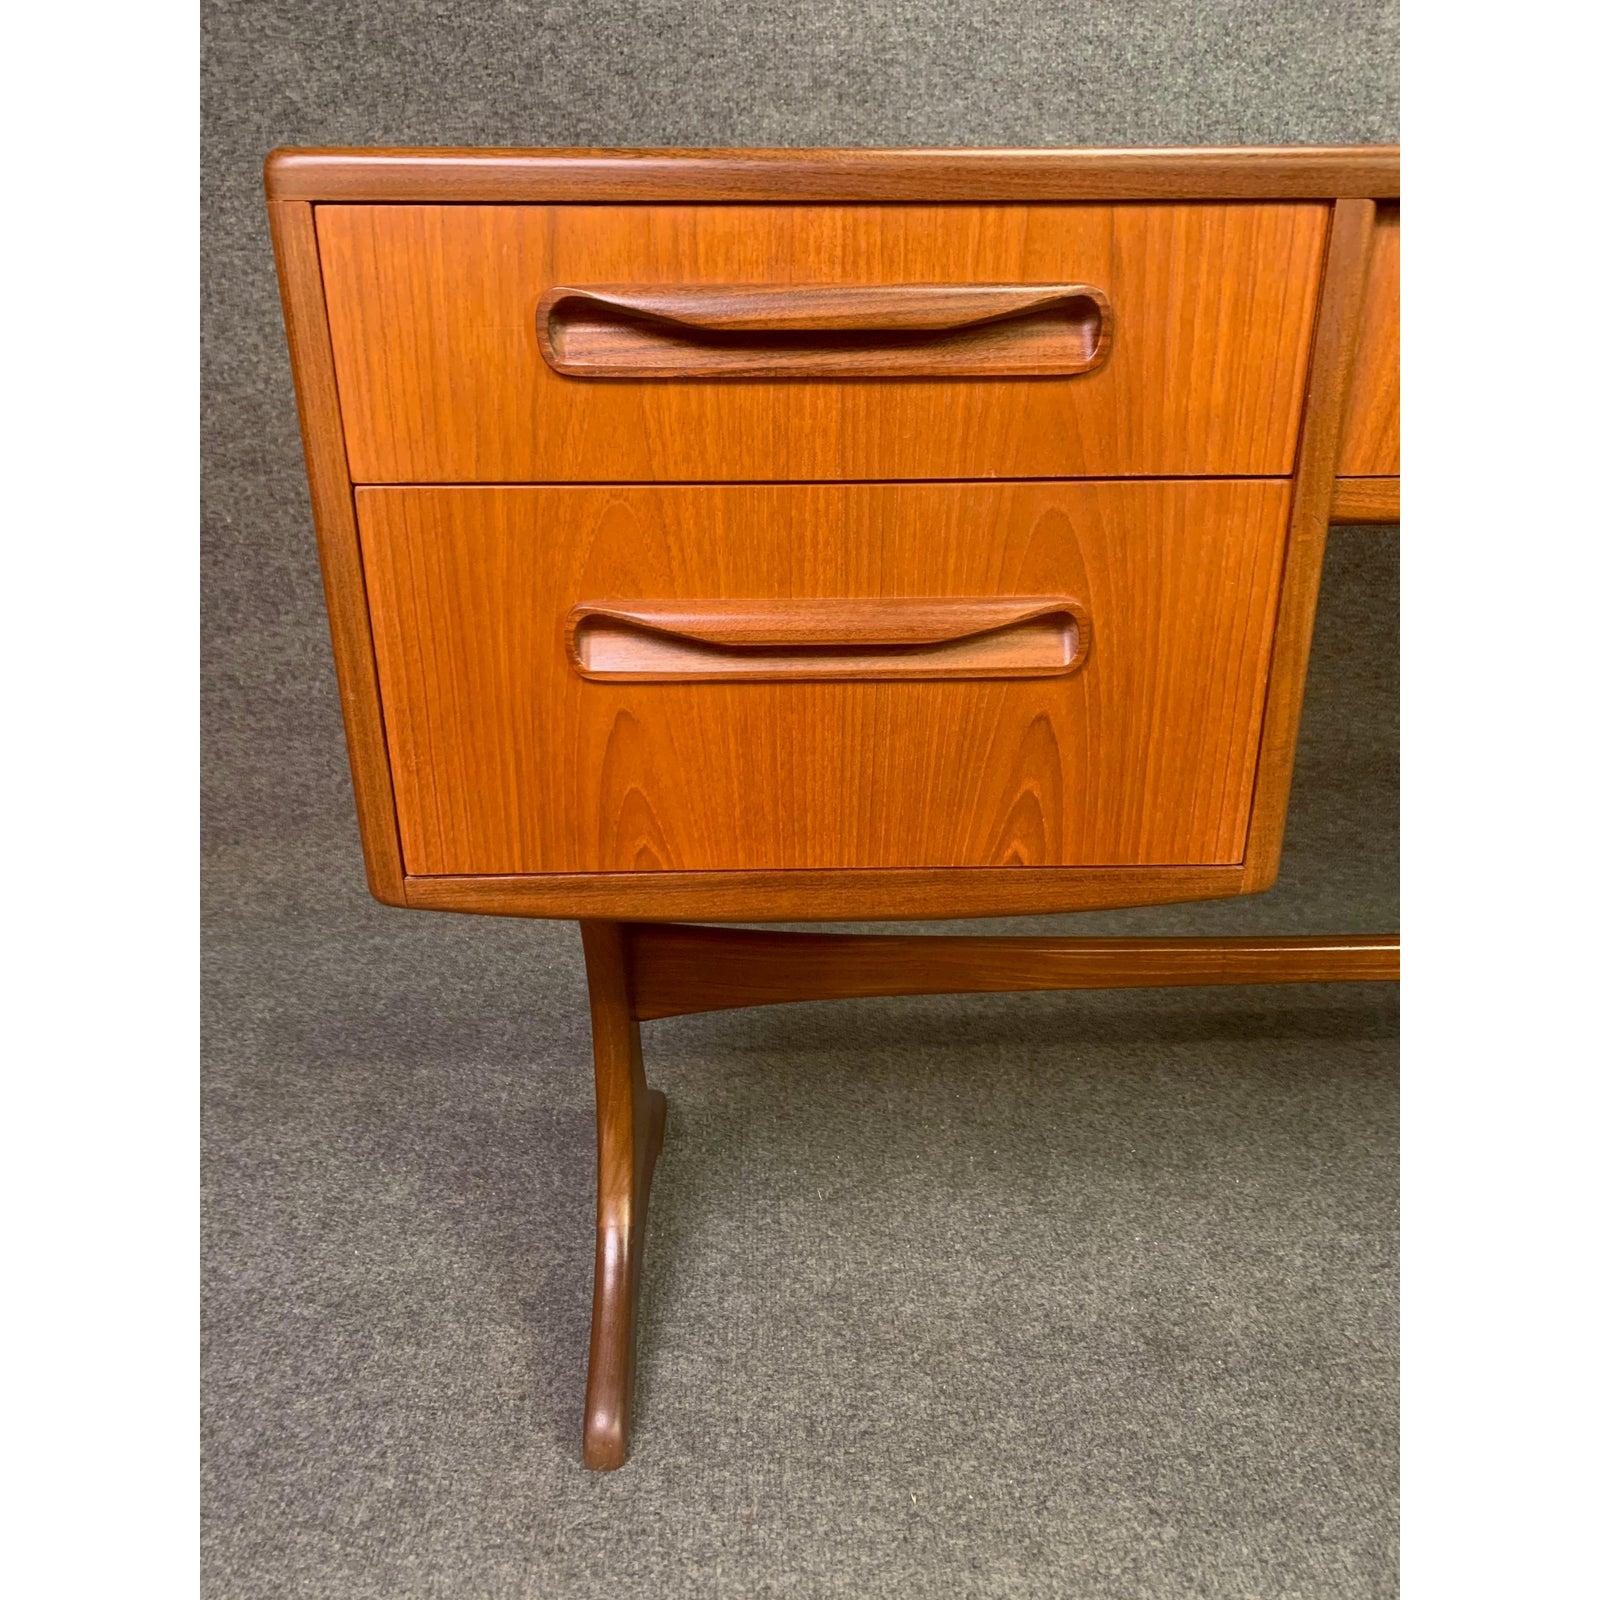 Here is a beautiful and rare British Mid-Century Modern work table part of the acclaimed 